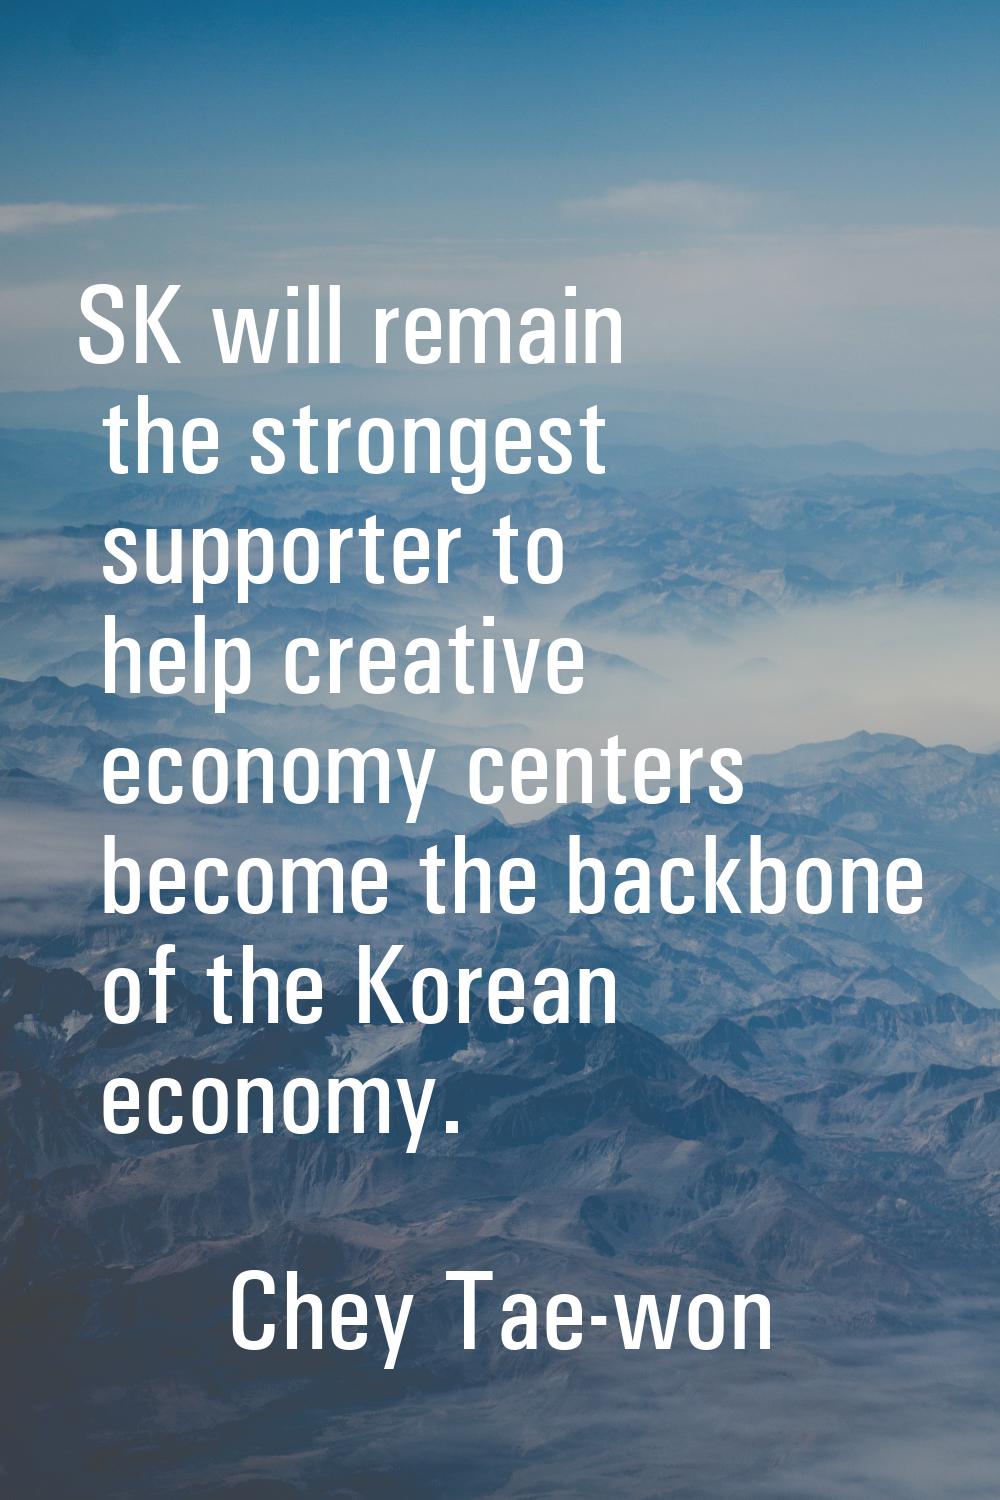 SK will remain the strongest supporter to help creative economy centers become the backbone of the 